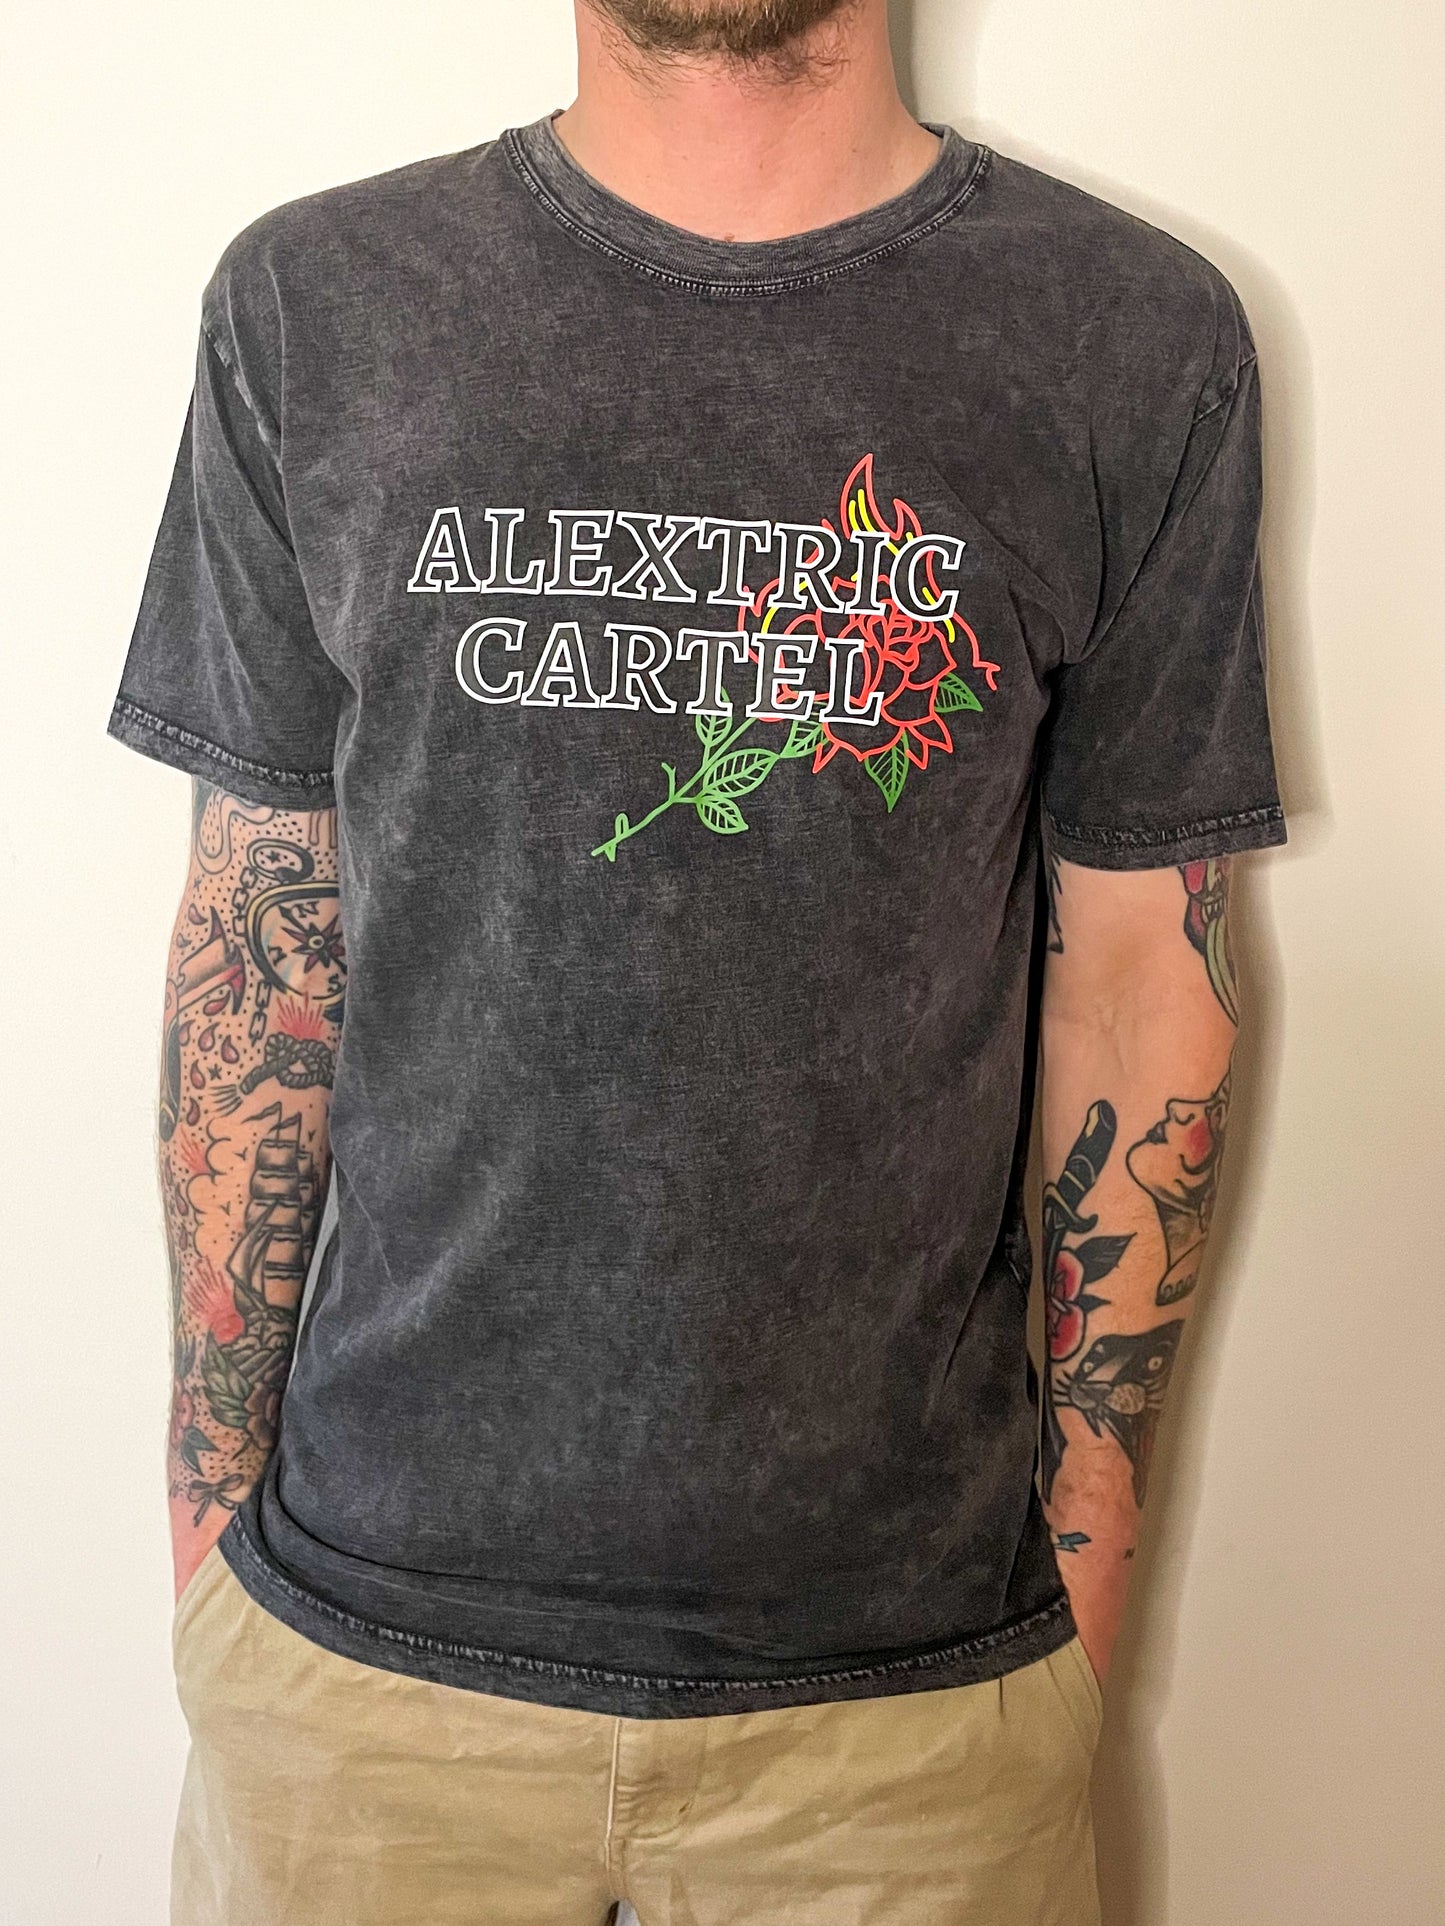 Vintage stone wash t-shirt with flame rose design.